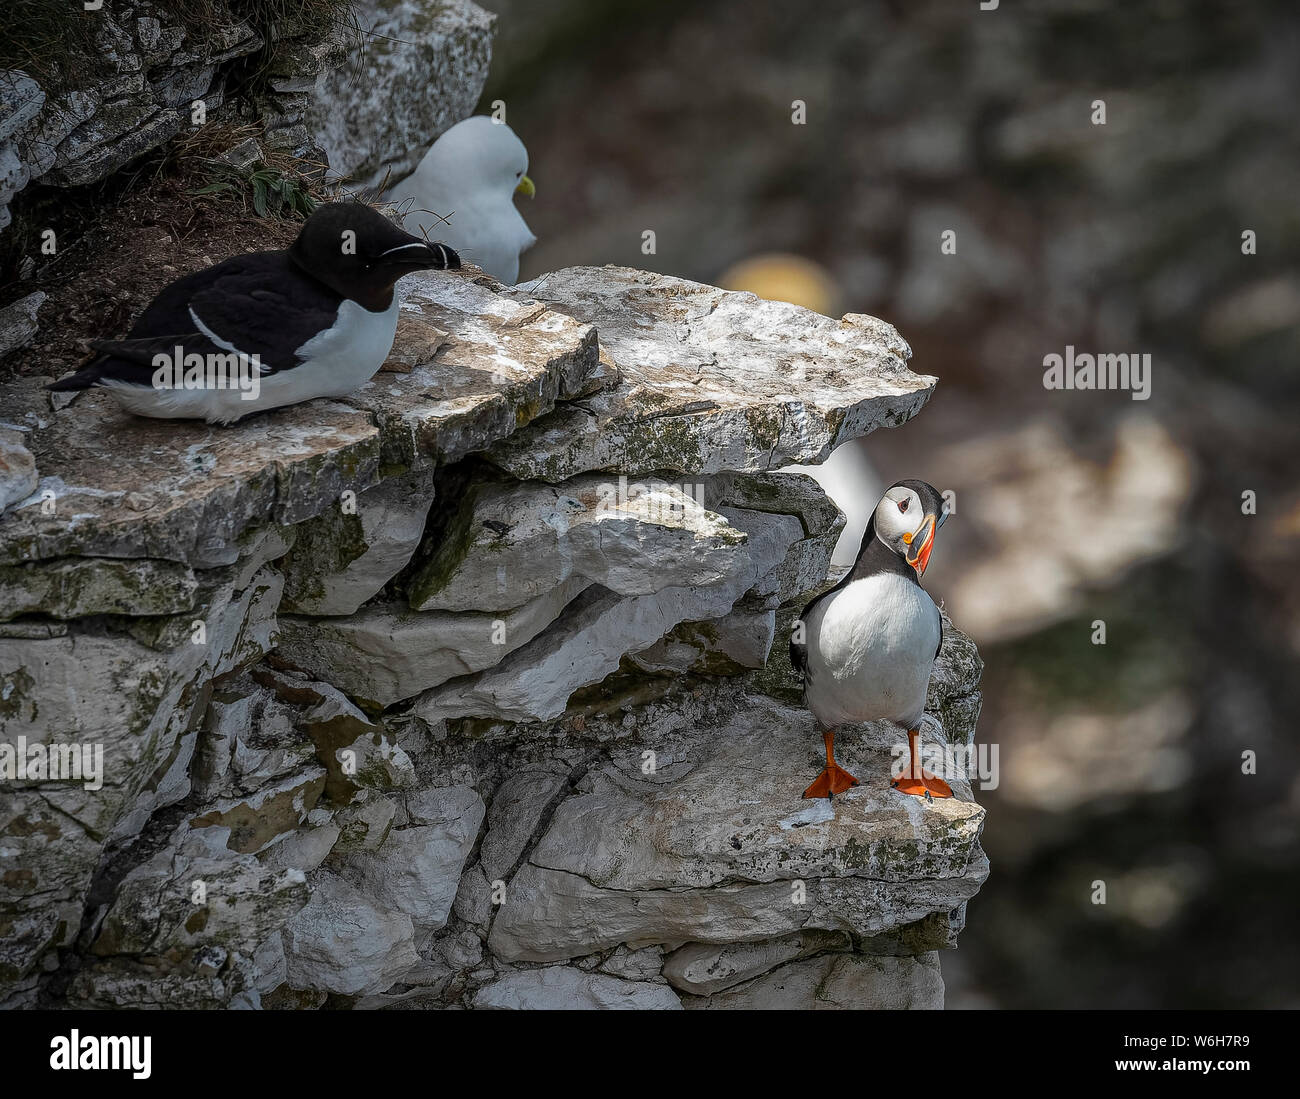 Puffin on cliff ledge Stock Photo